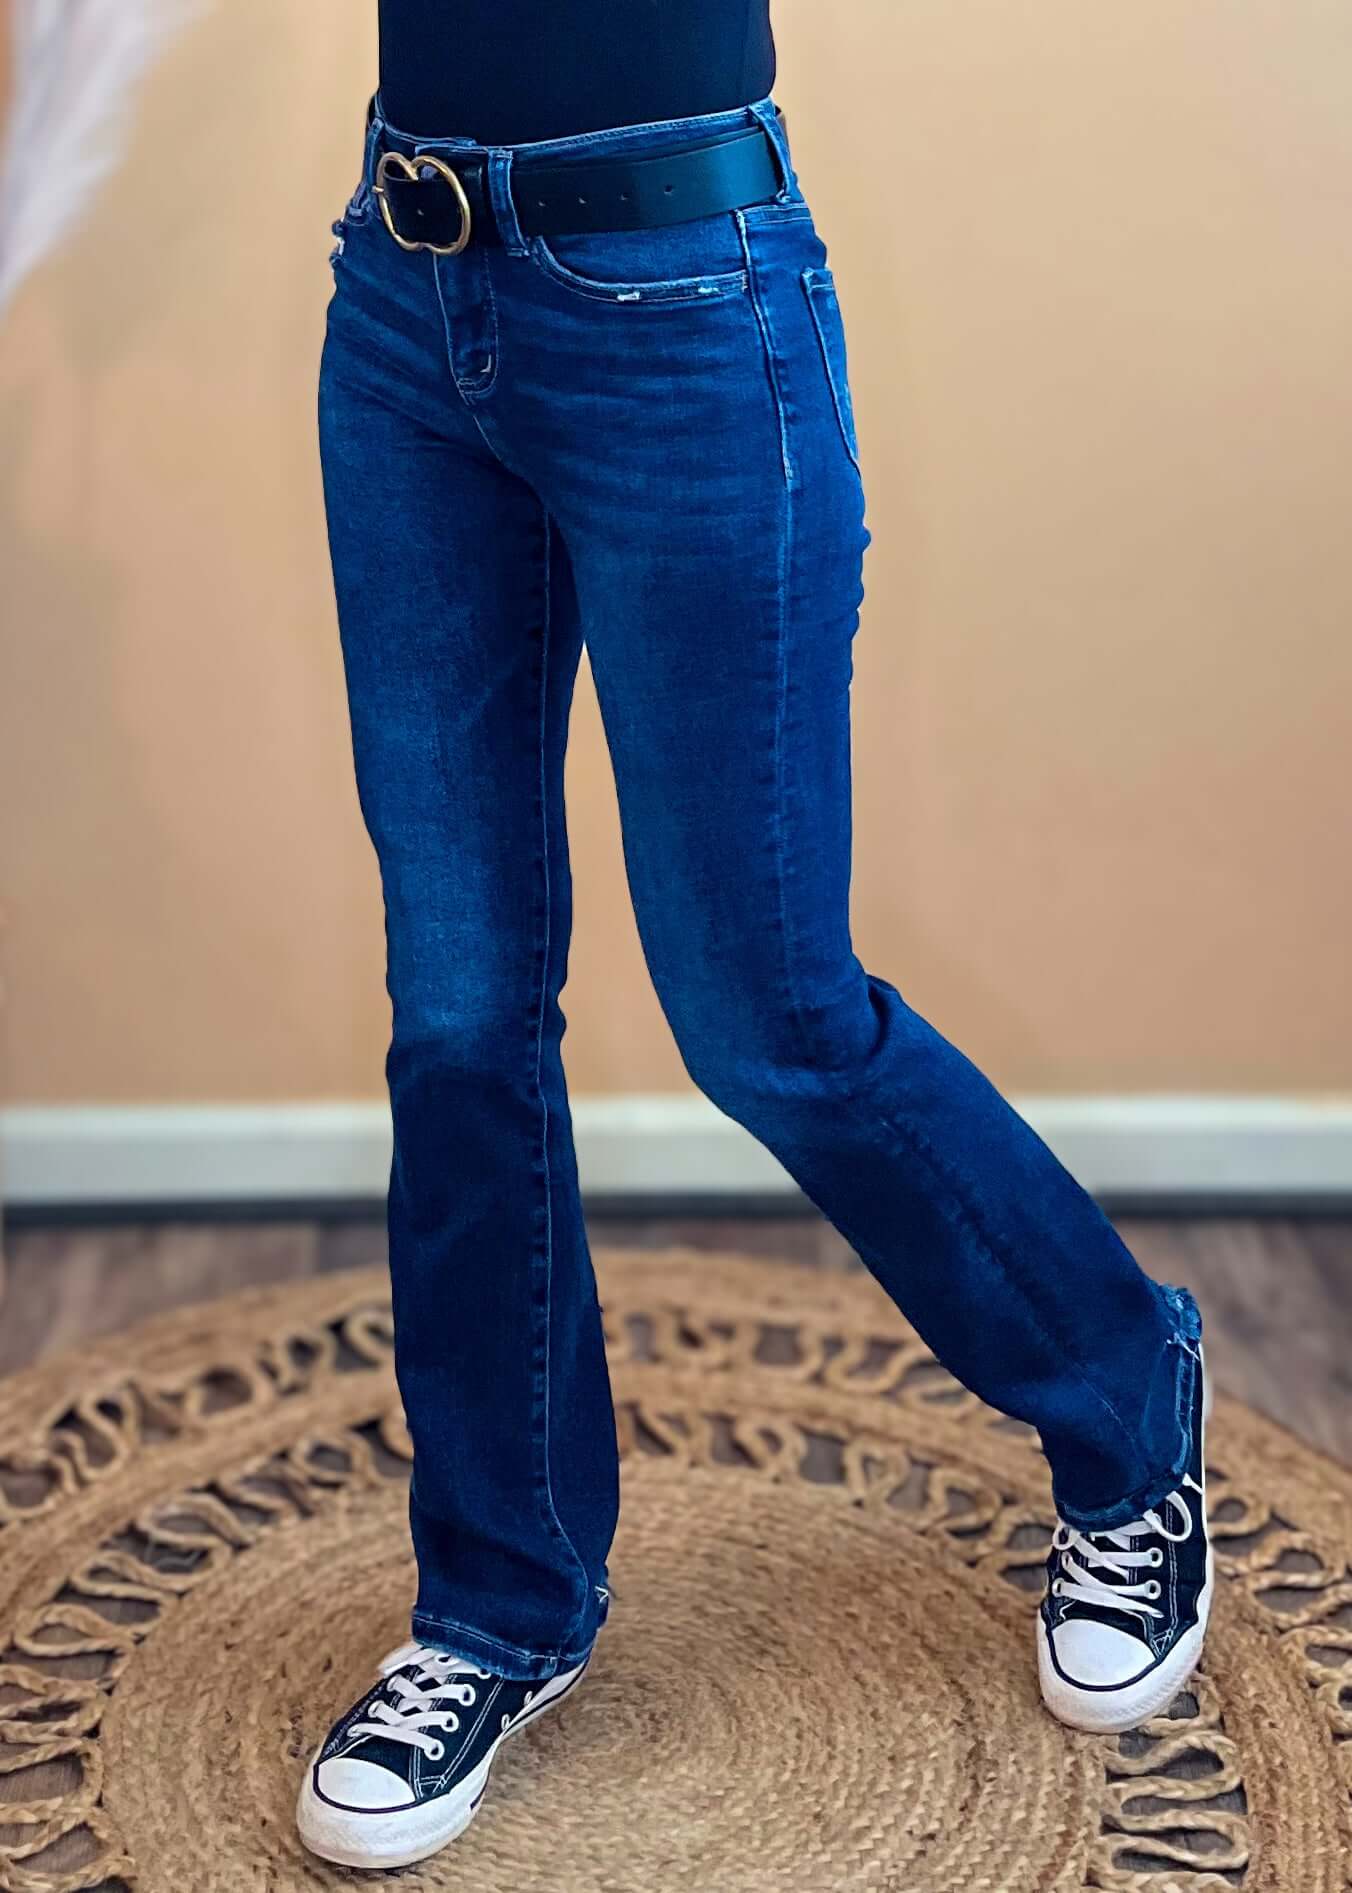 Straight slim line with a flattering boot cut for a stylish look